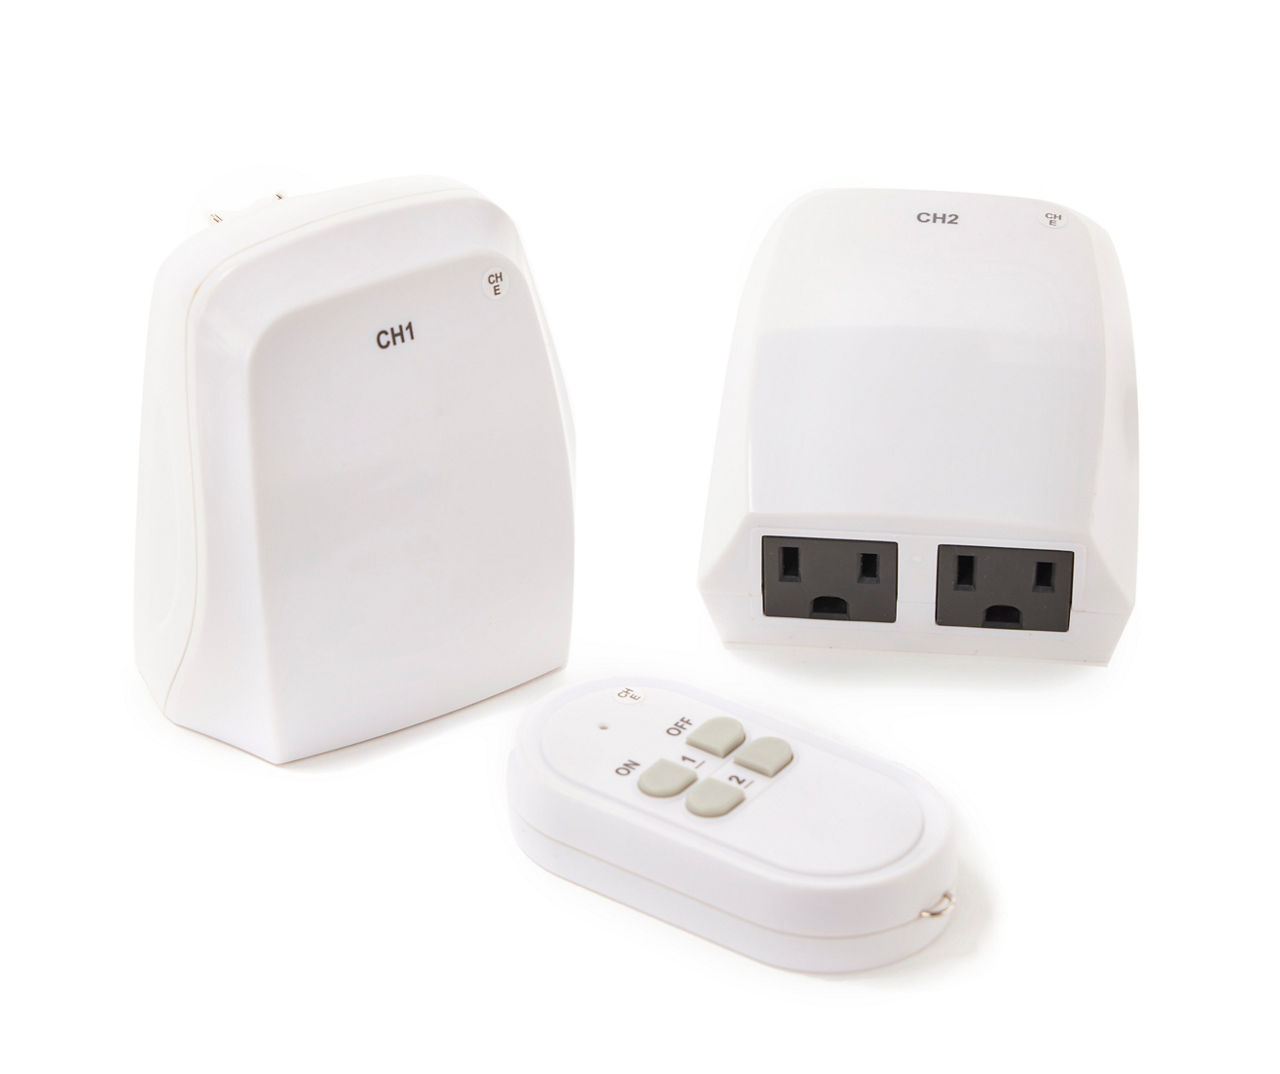 Remote Control Outlet Plug Adapter (2 Pack) with Dual Remote